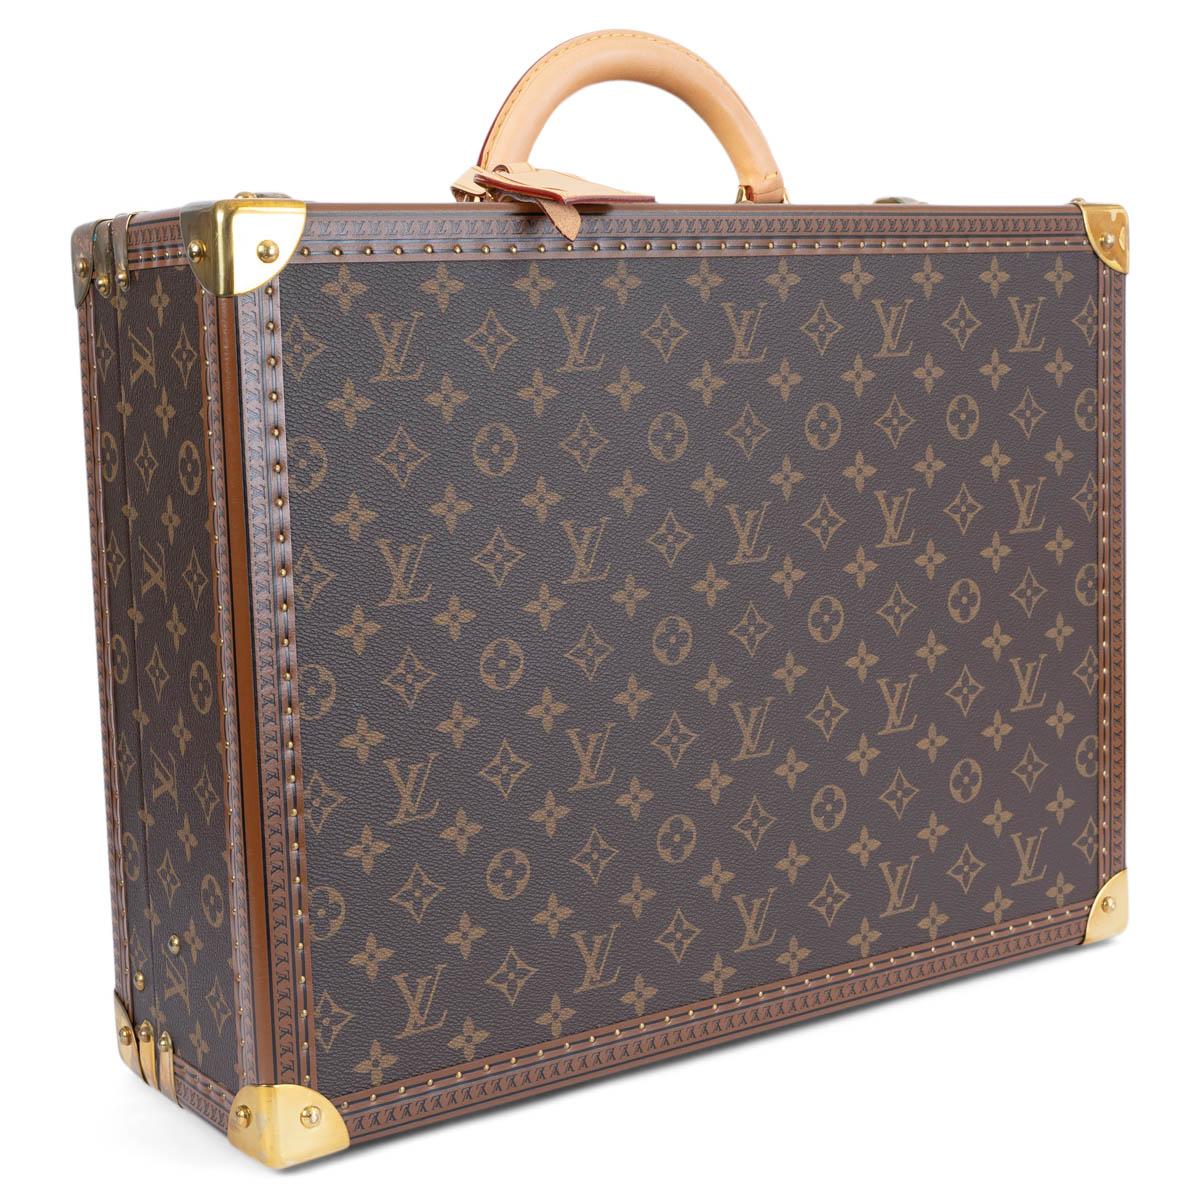 100% authentic Louis Vuitton Alzer 45 suitcase in classic Ebene brown Monogram canvas. Features a hardshell, LV stamped leather trim with brass rivets, brass corner reinforcements and a rounded leather handle. Closes with a brass lock and two